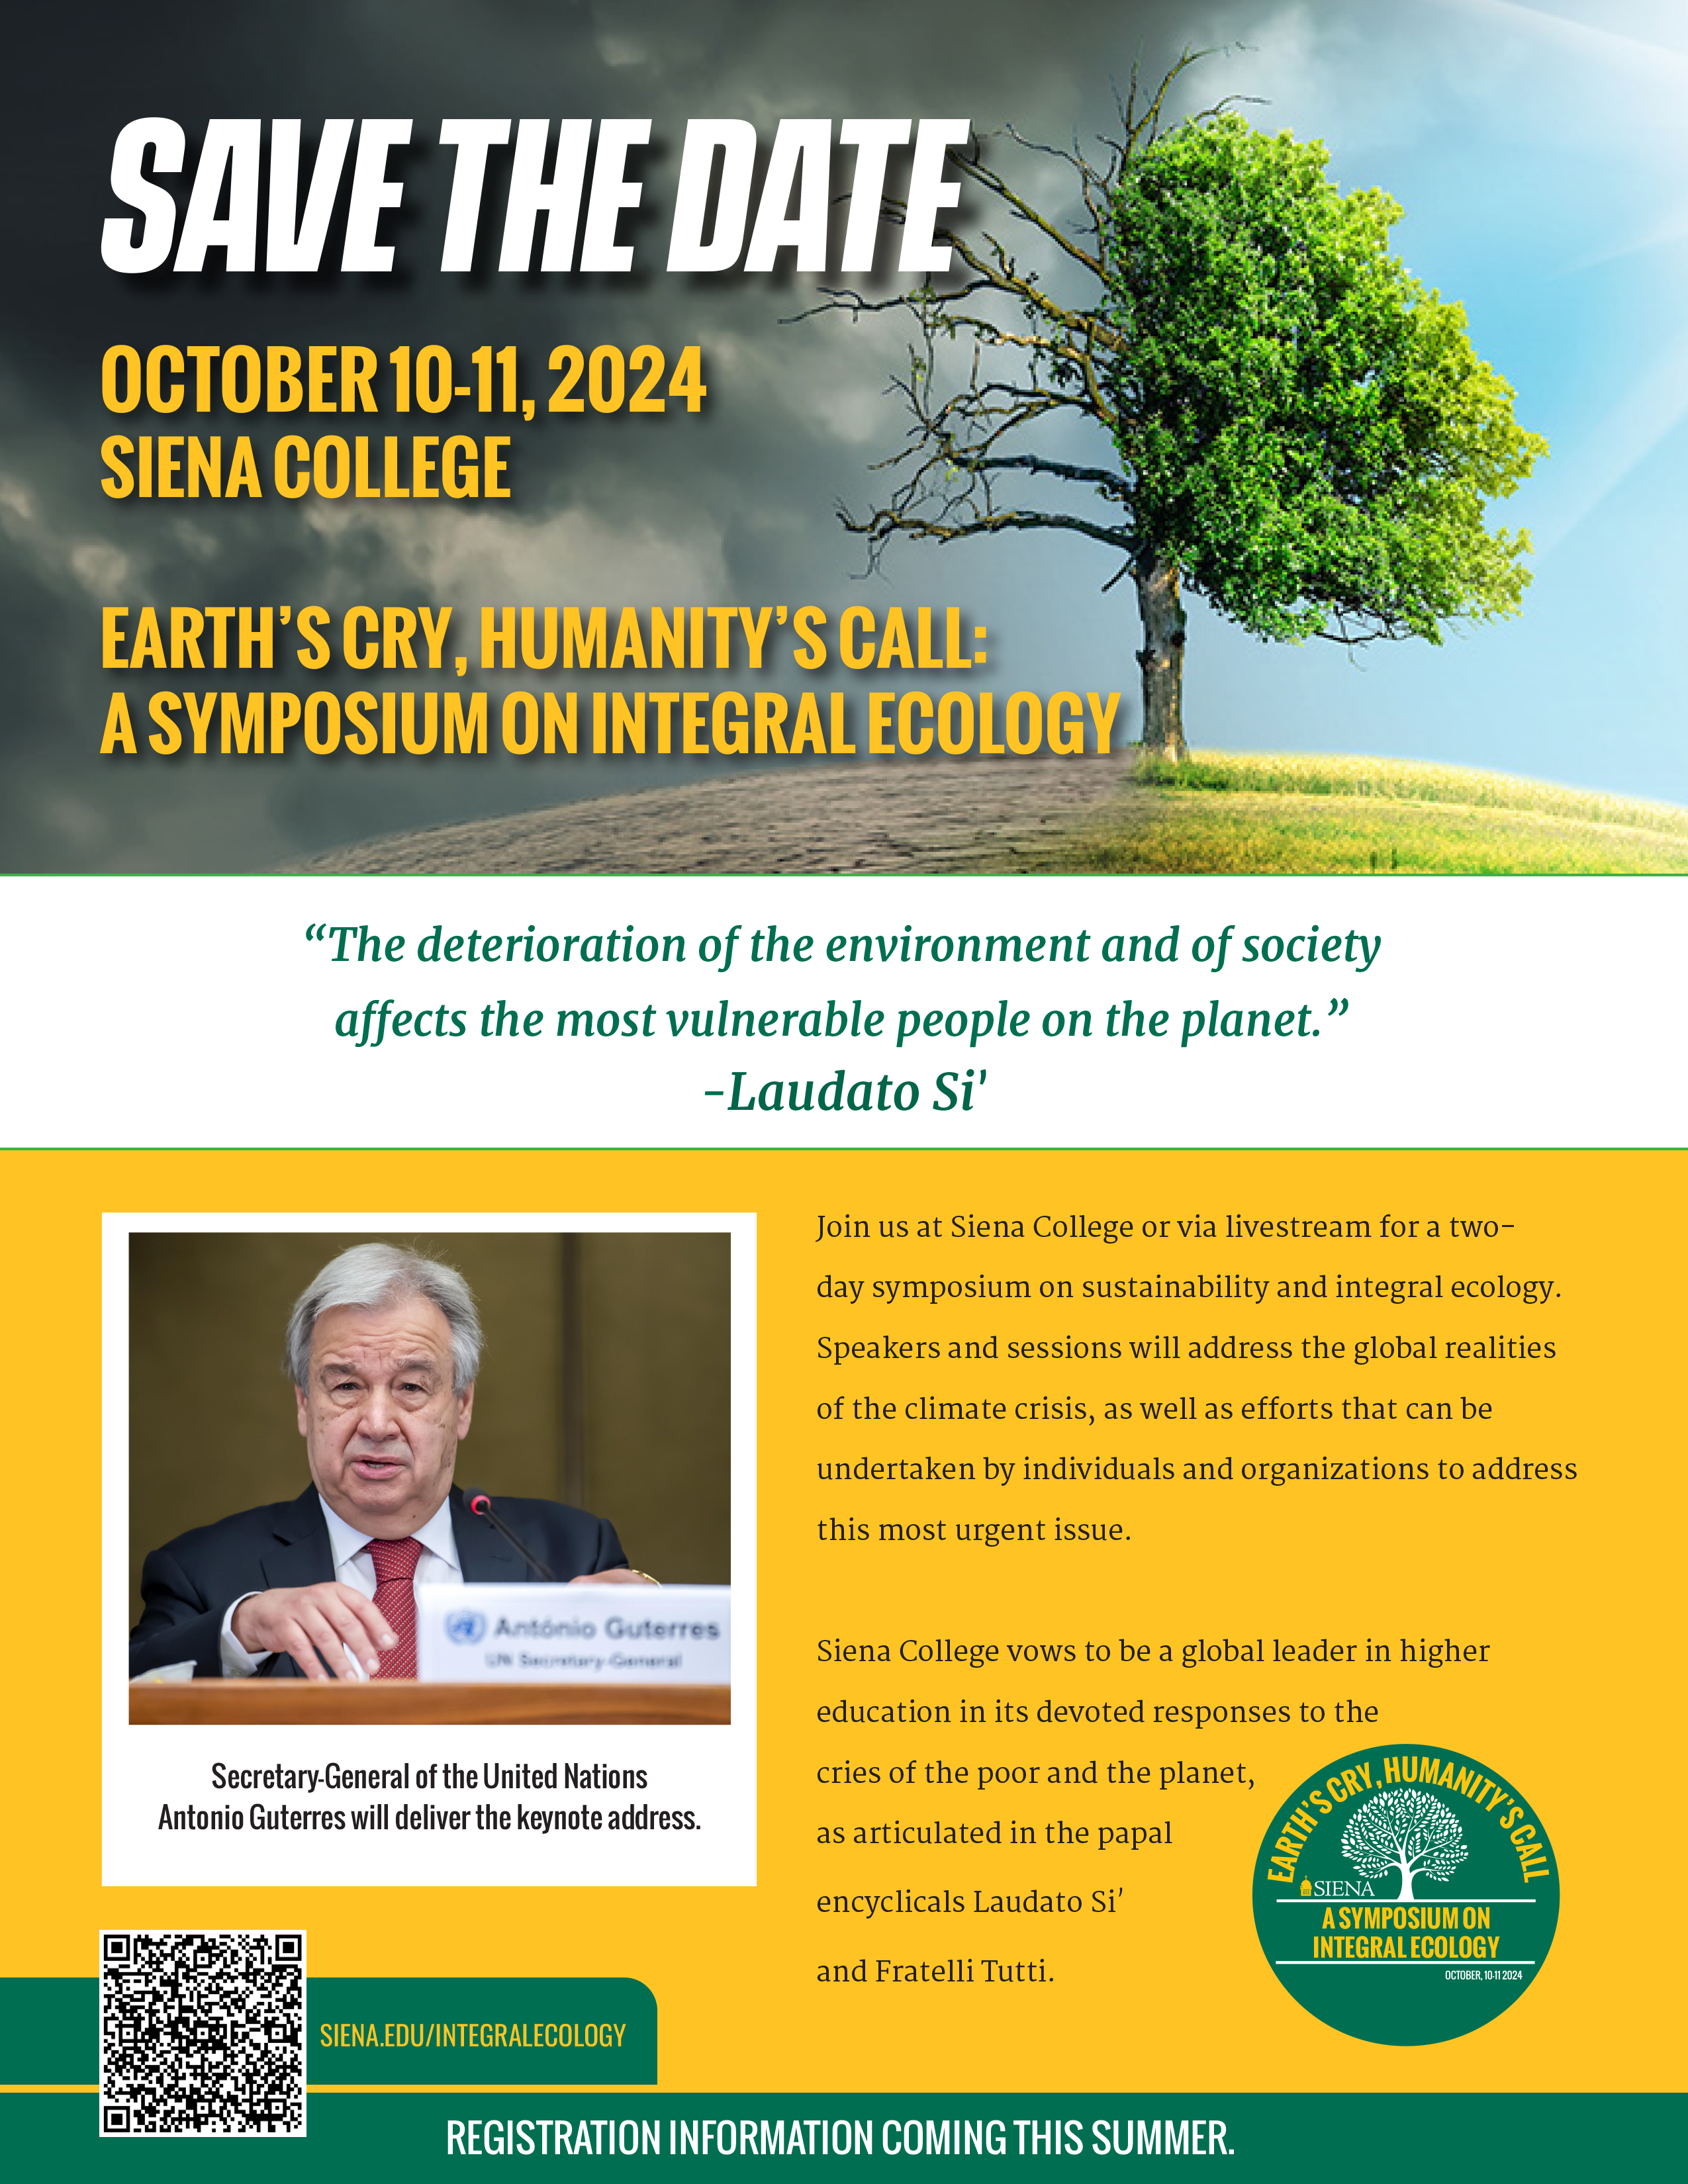 Join us at Siena College or via livestream for a two-day symposium on sustainability and integral ecology. Speakers and sessions will address the global realities of the climate crisis, as well as efforts that can address this urgent issue.